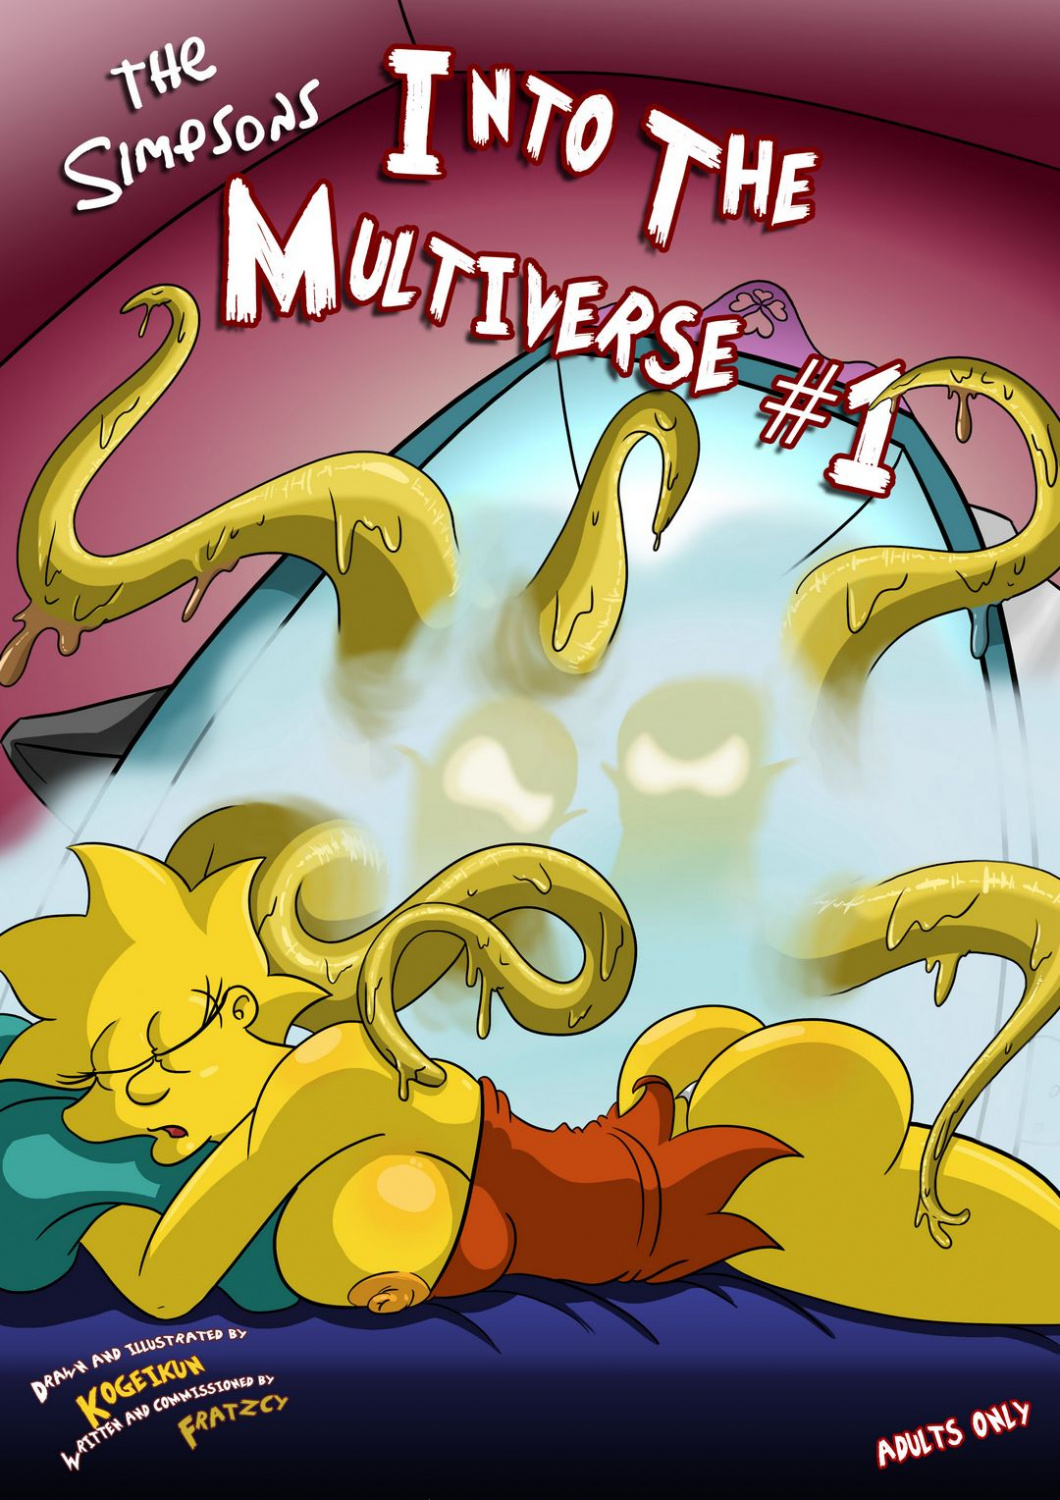 Simpsons Forced Porn - The Simpsons Into the Multiverse - Multporn Comics & Hentai manga